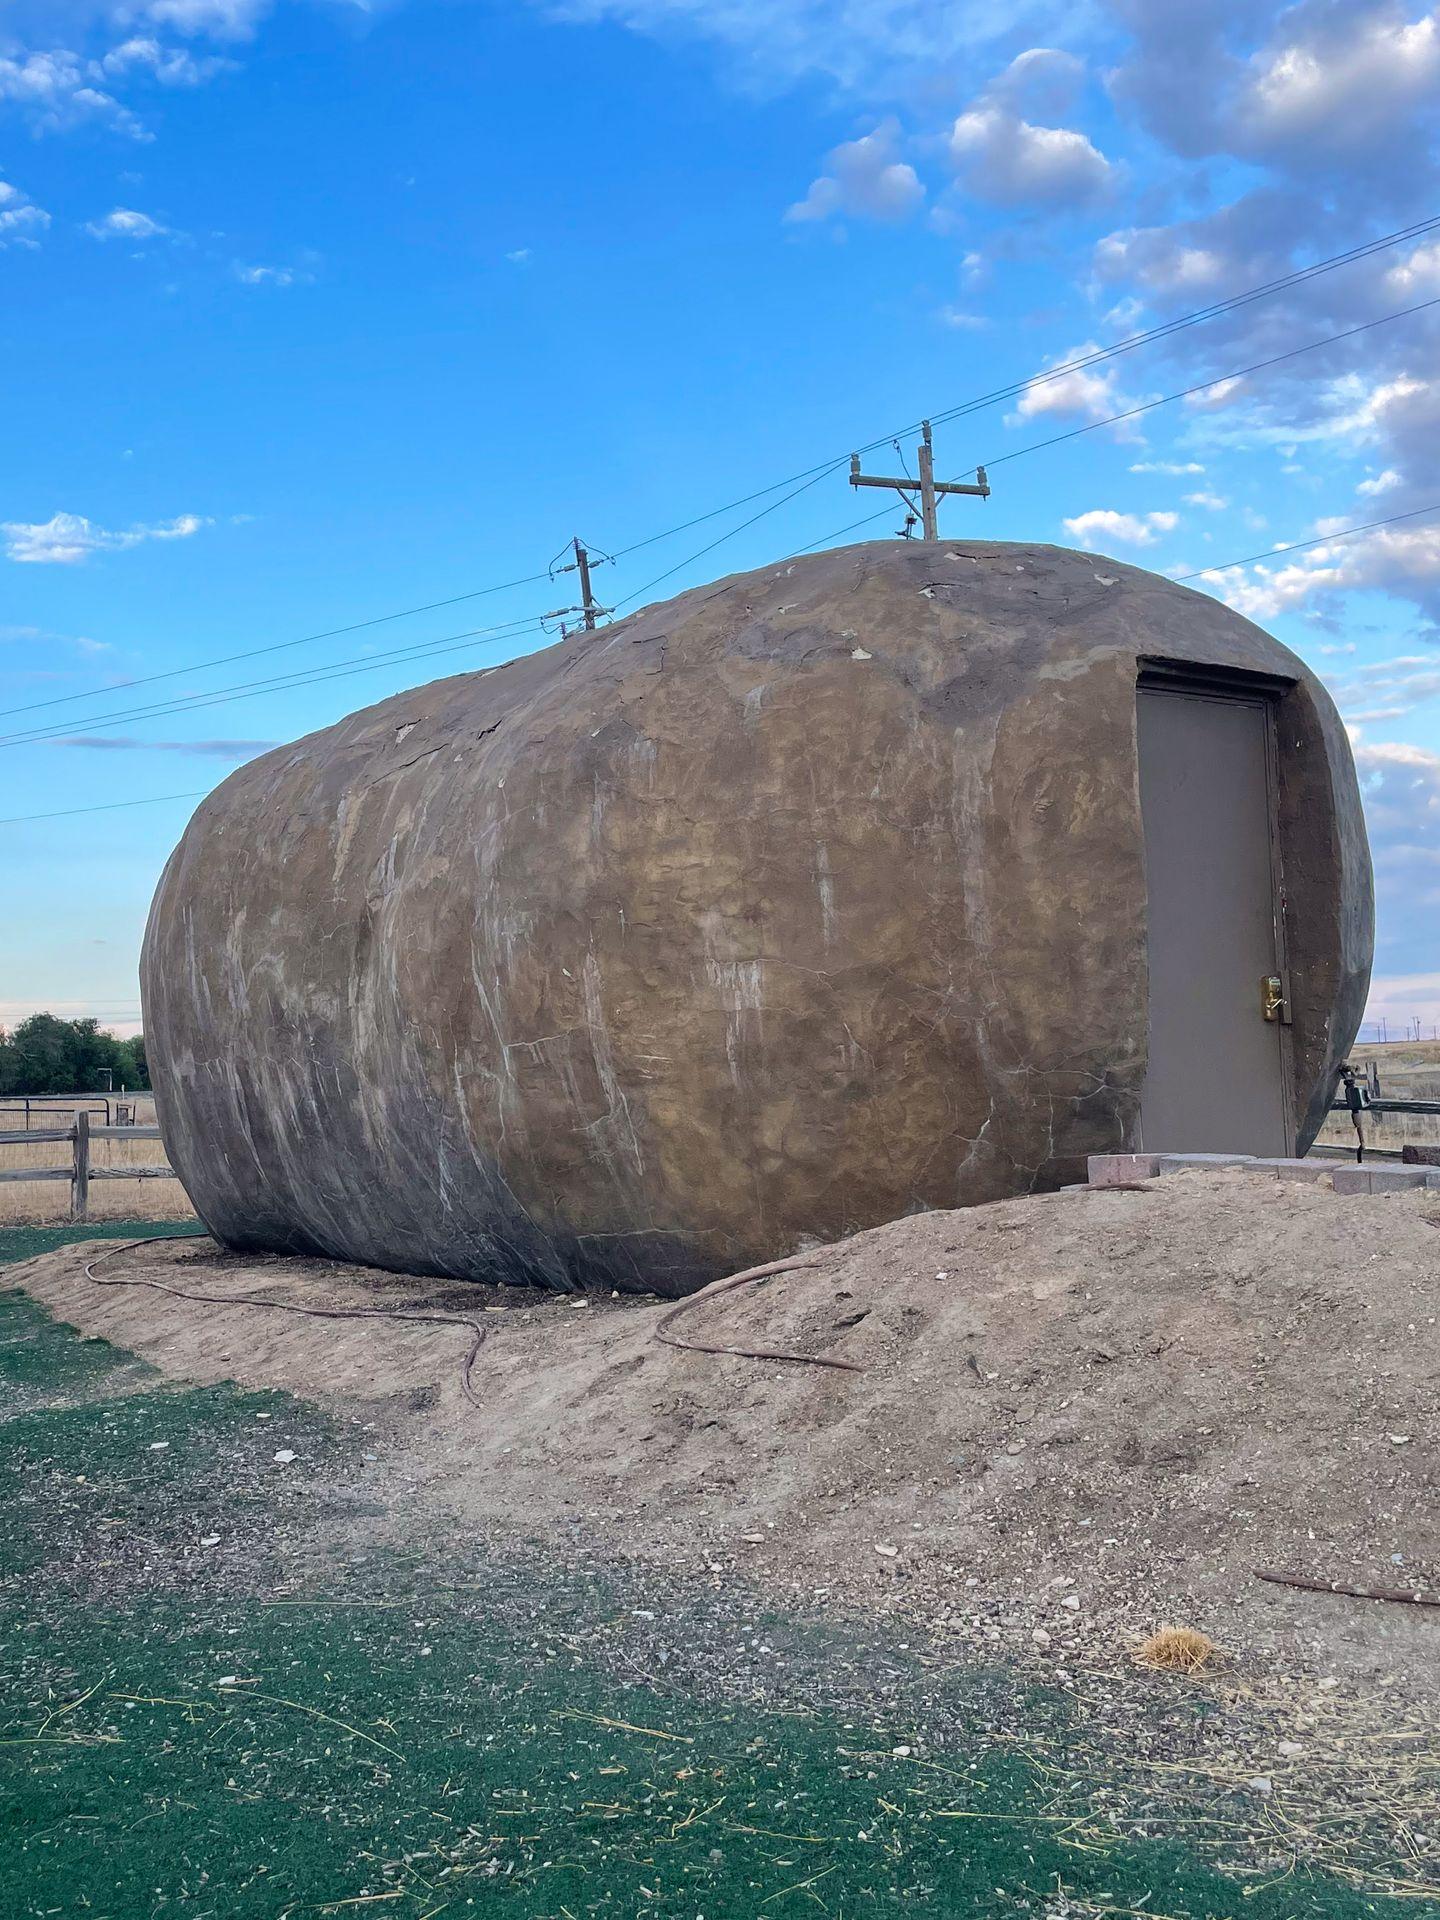 A giant potato with a door in the front.